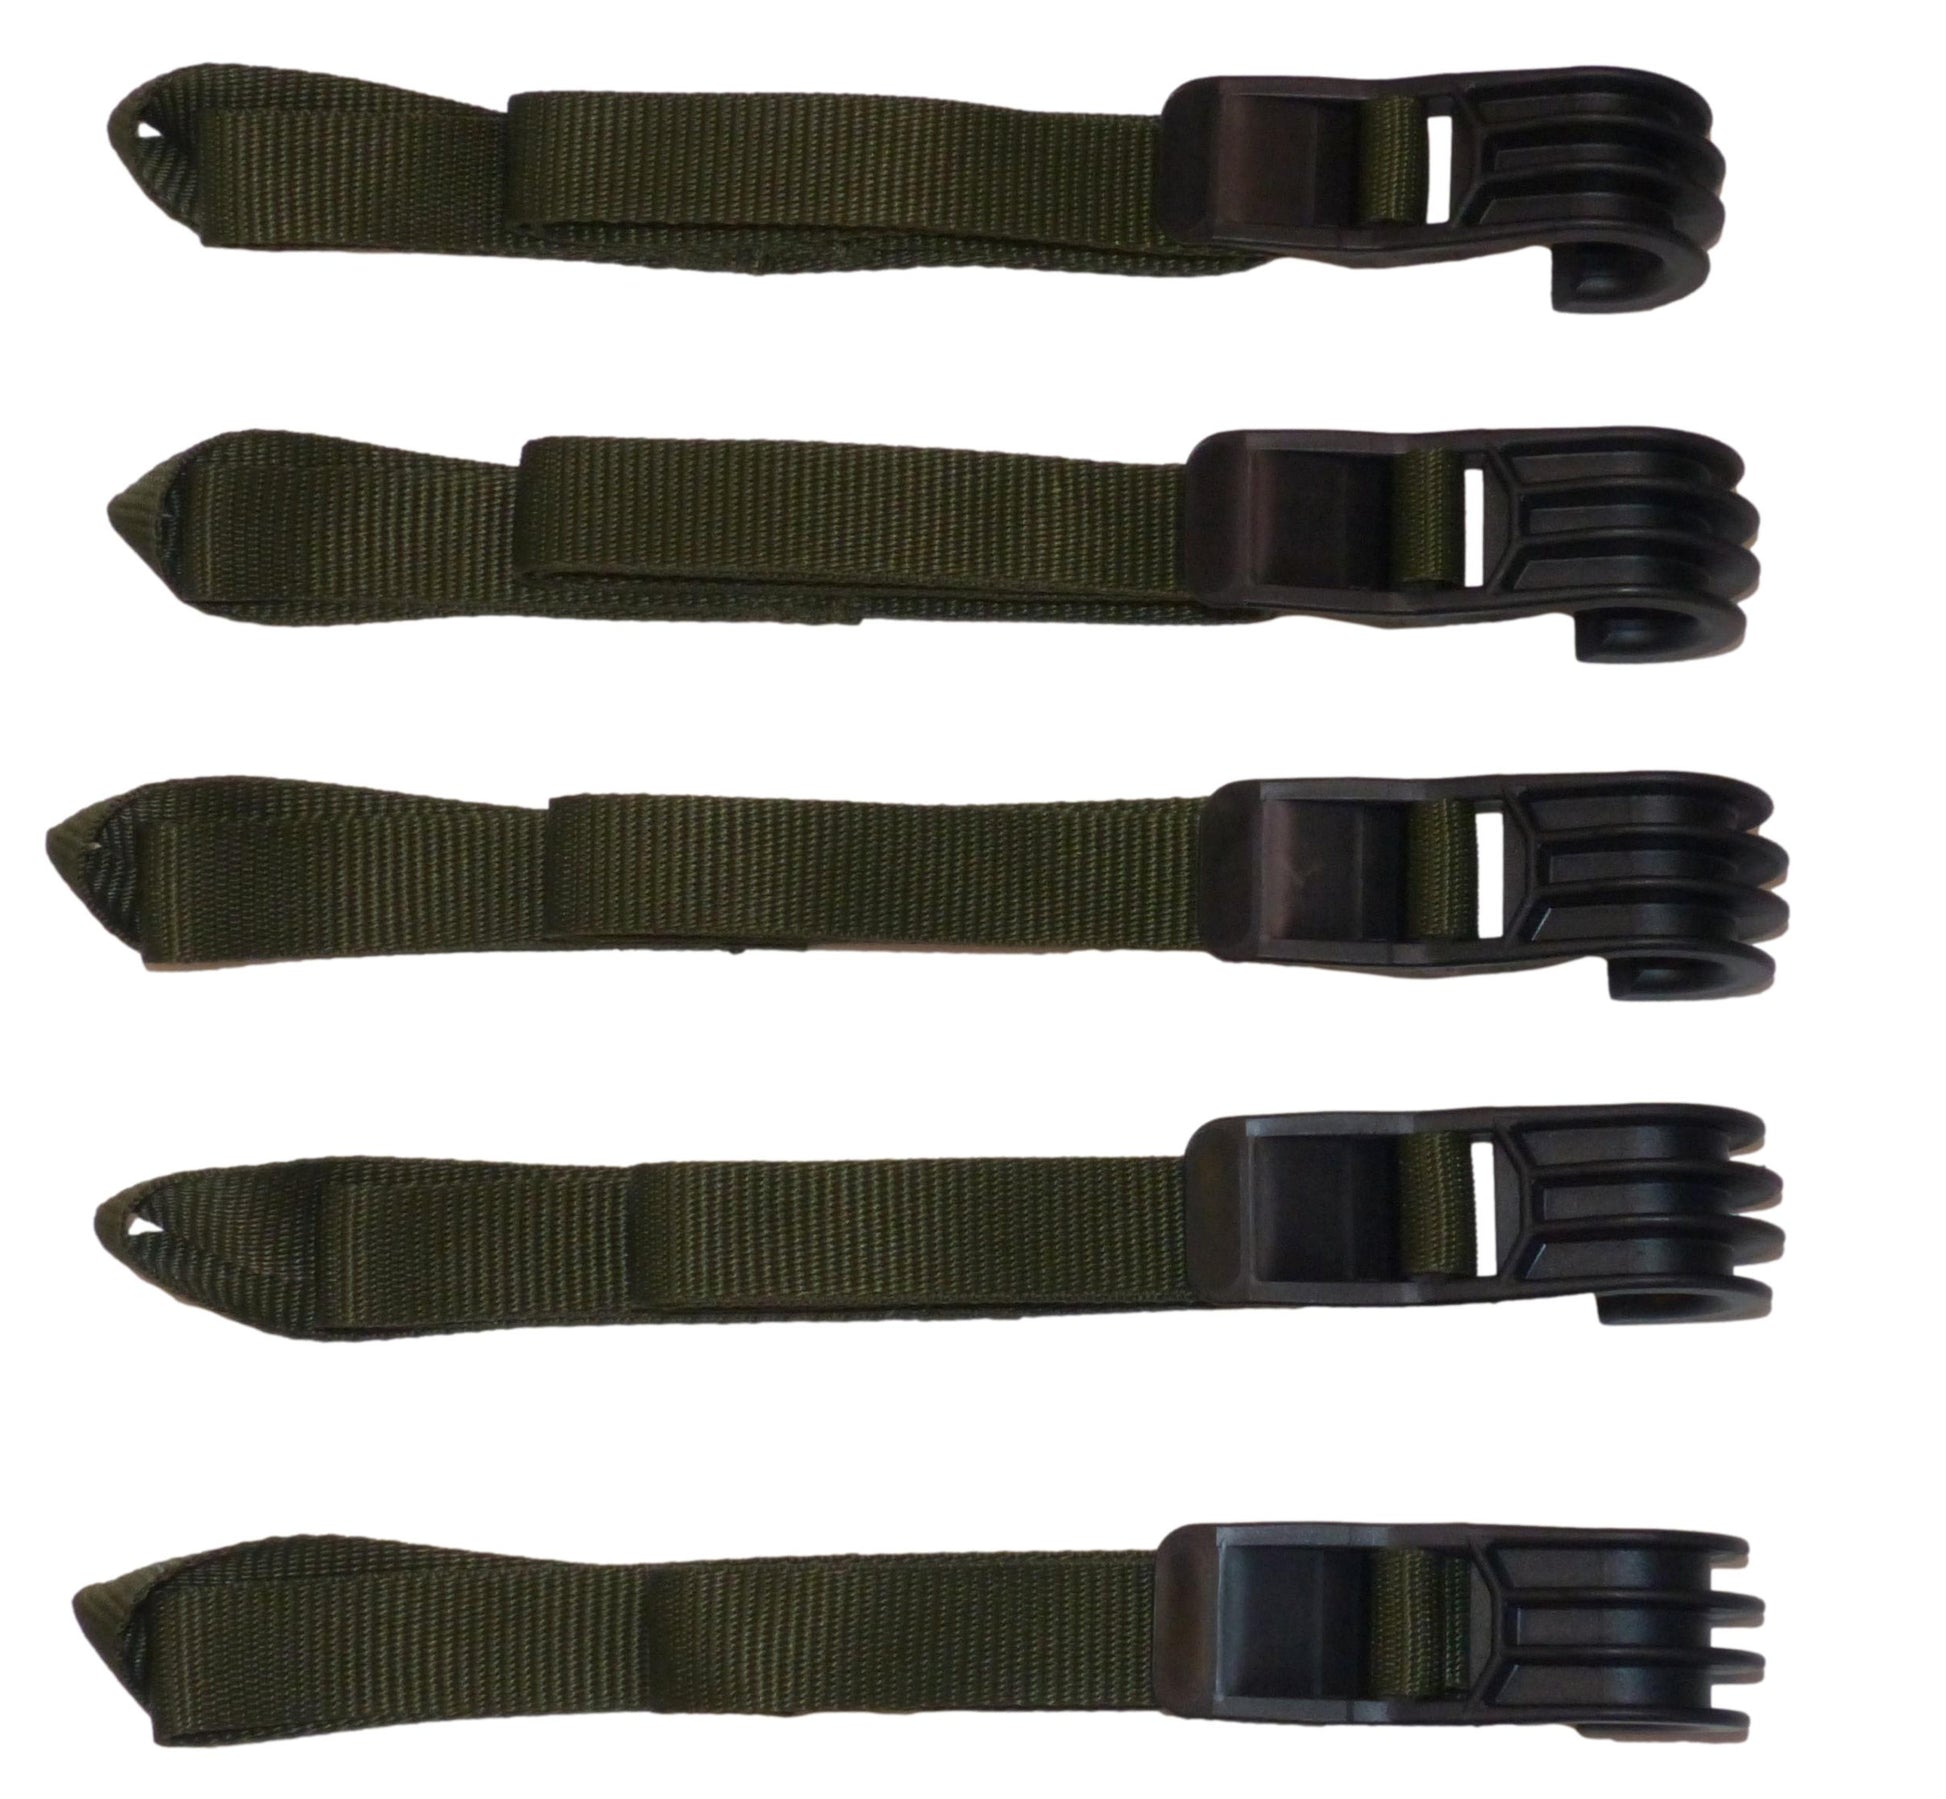 Benristraps Roll Cage, Trolley, Pallet Straps (Pack of 5) in olive